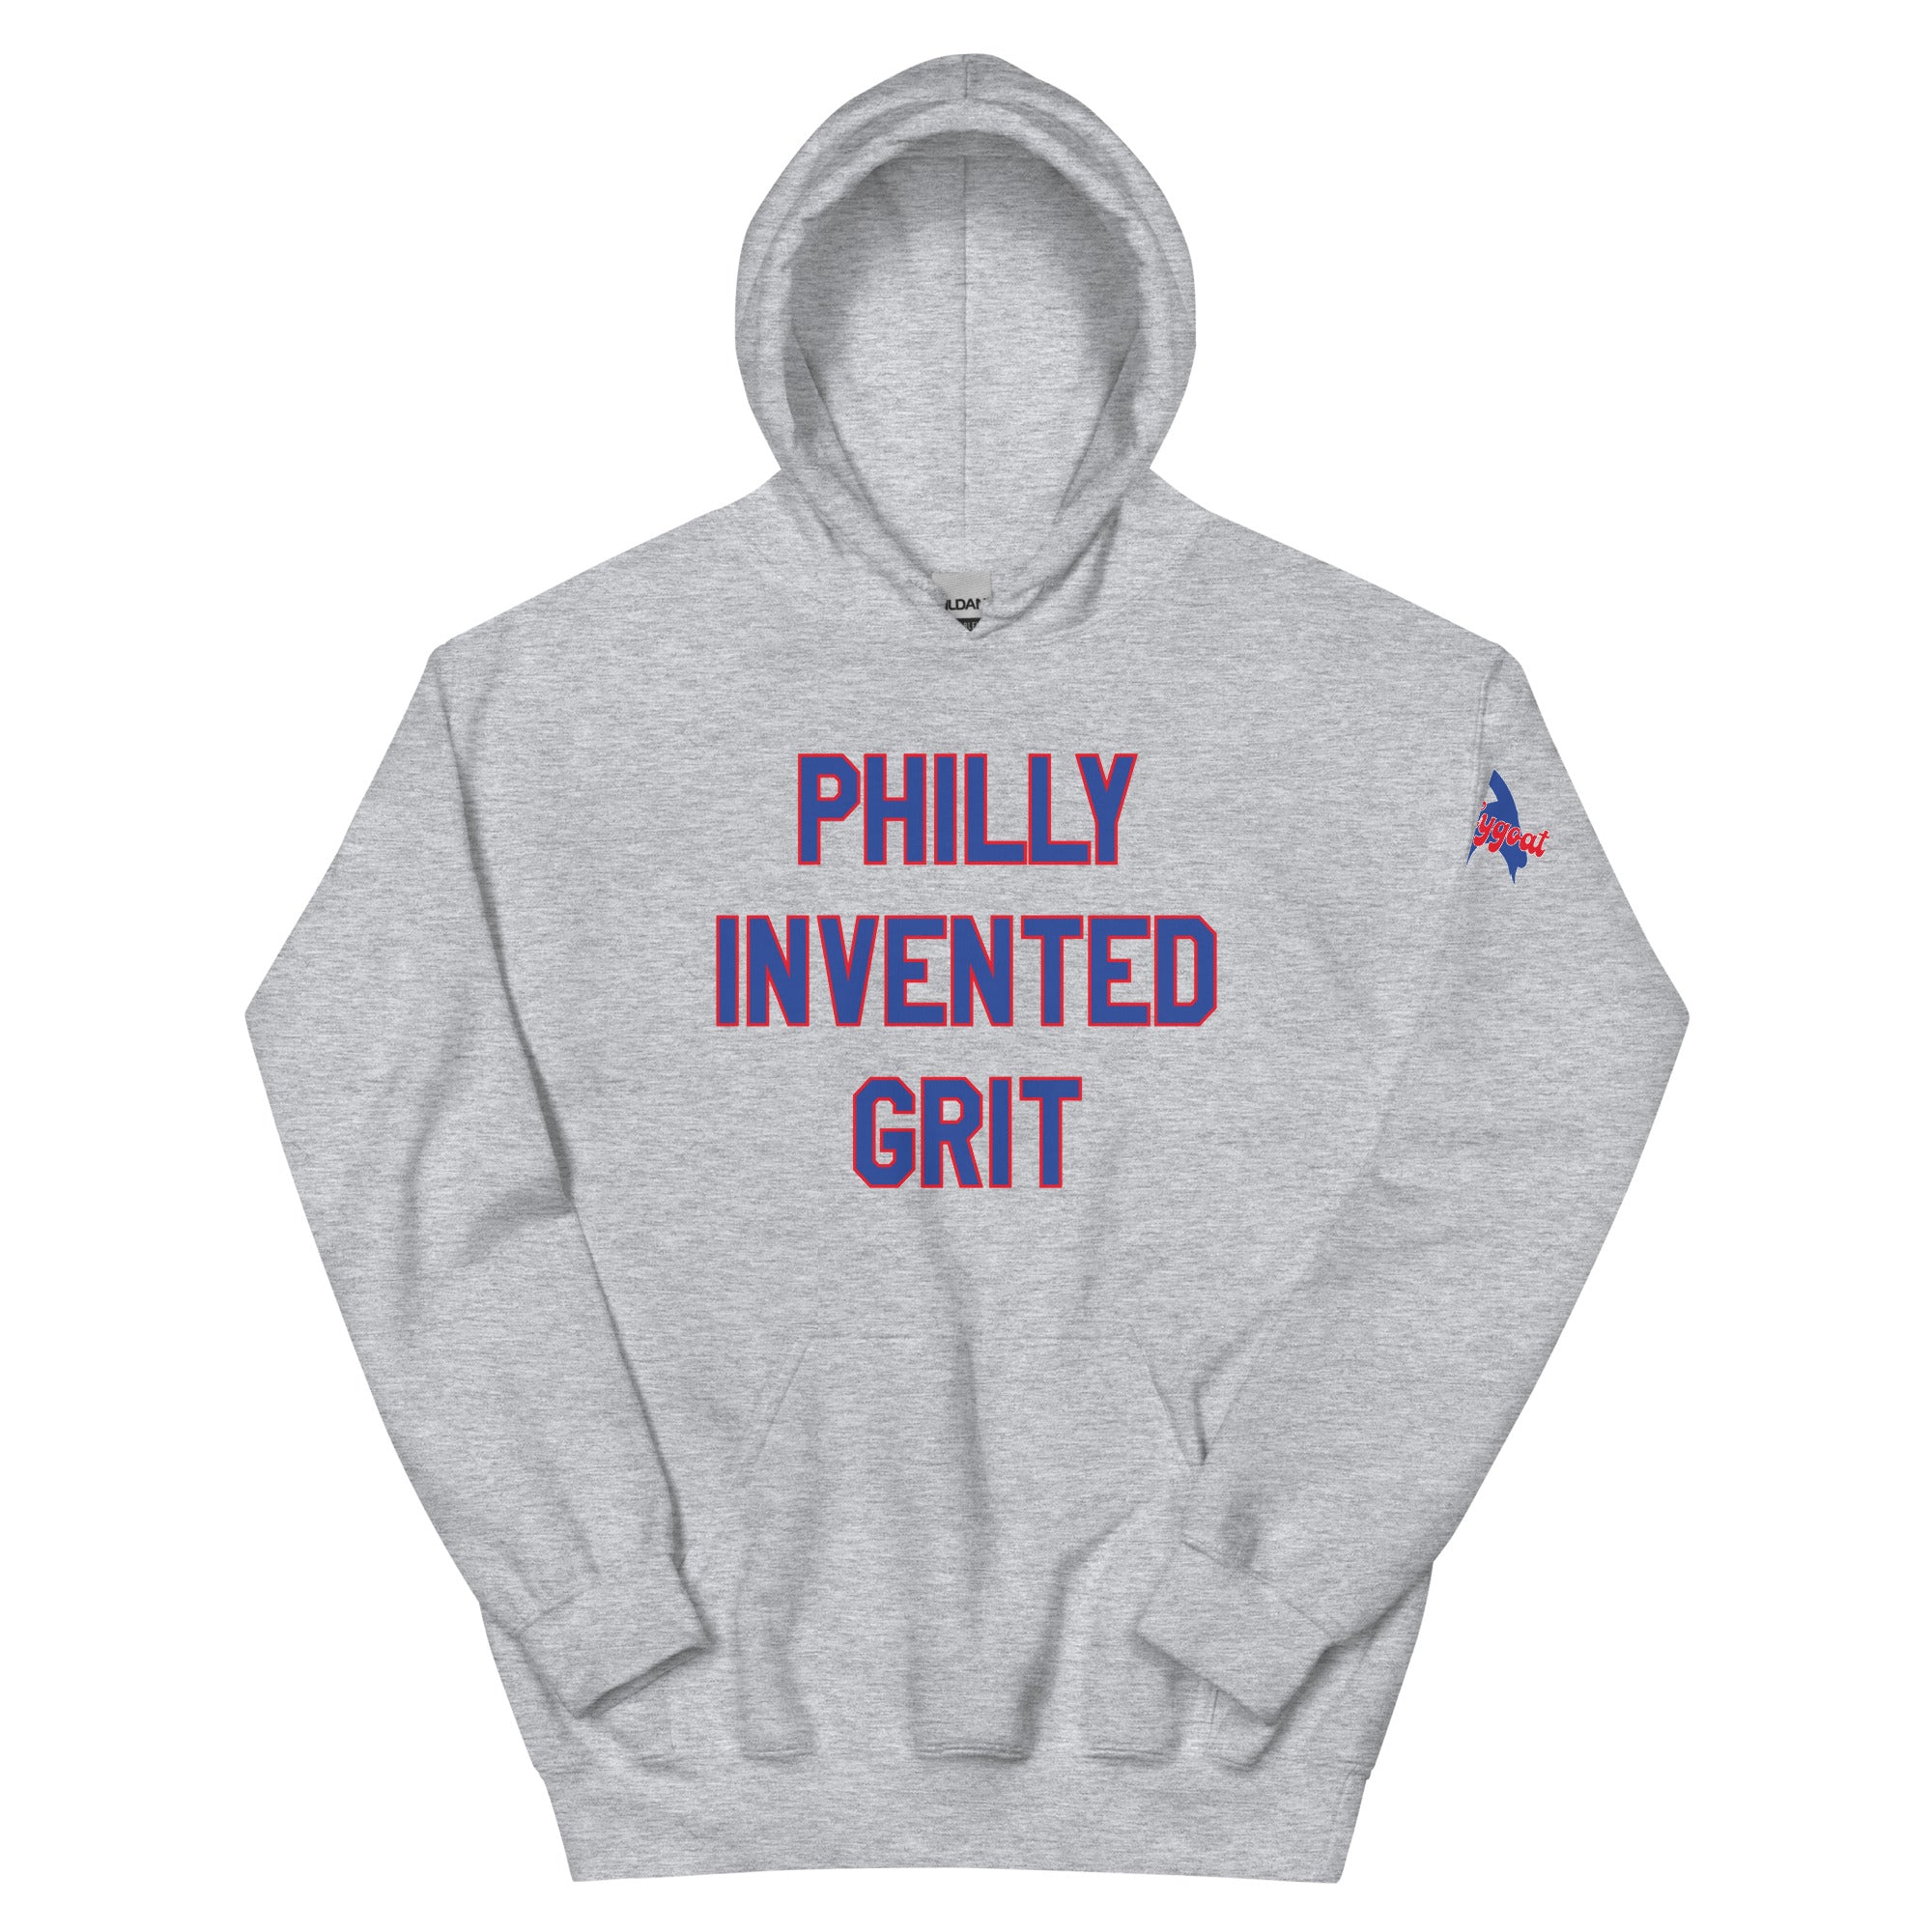 Philadelphia 76ers Phillies philly invented grit sport grey hoodie Phillygoat